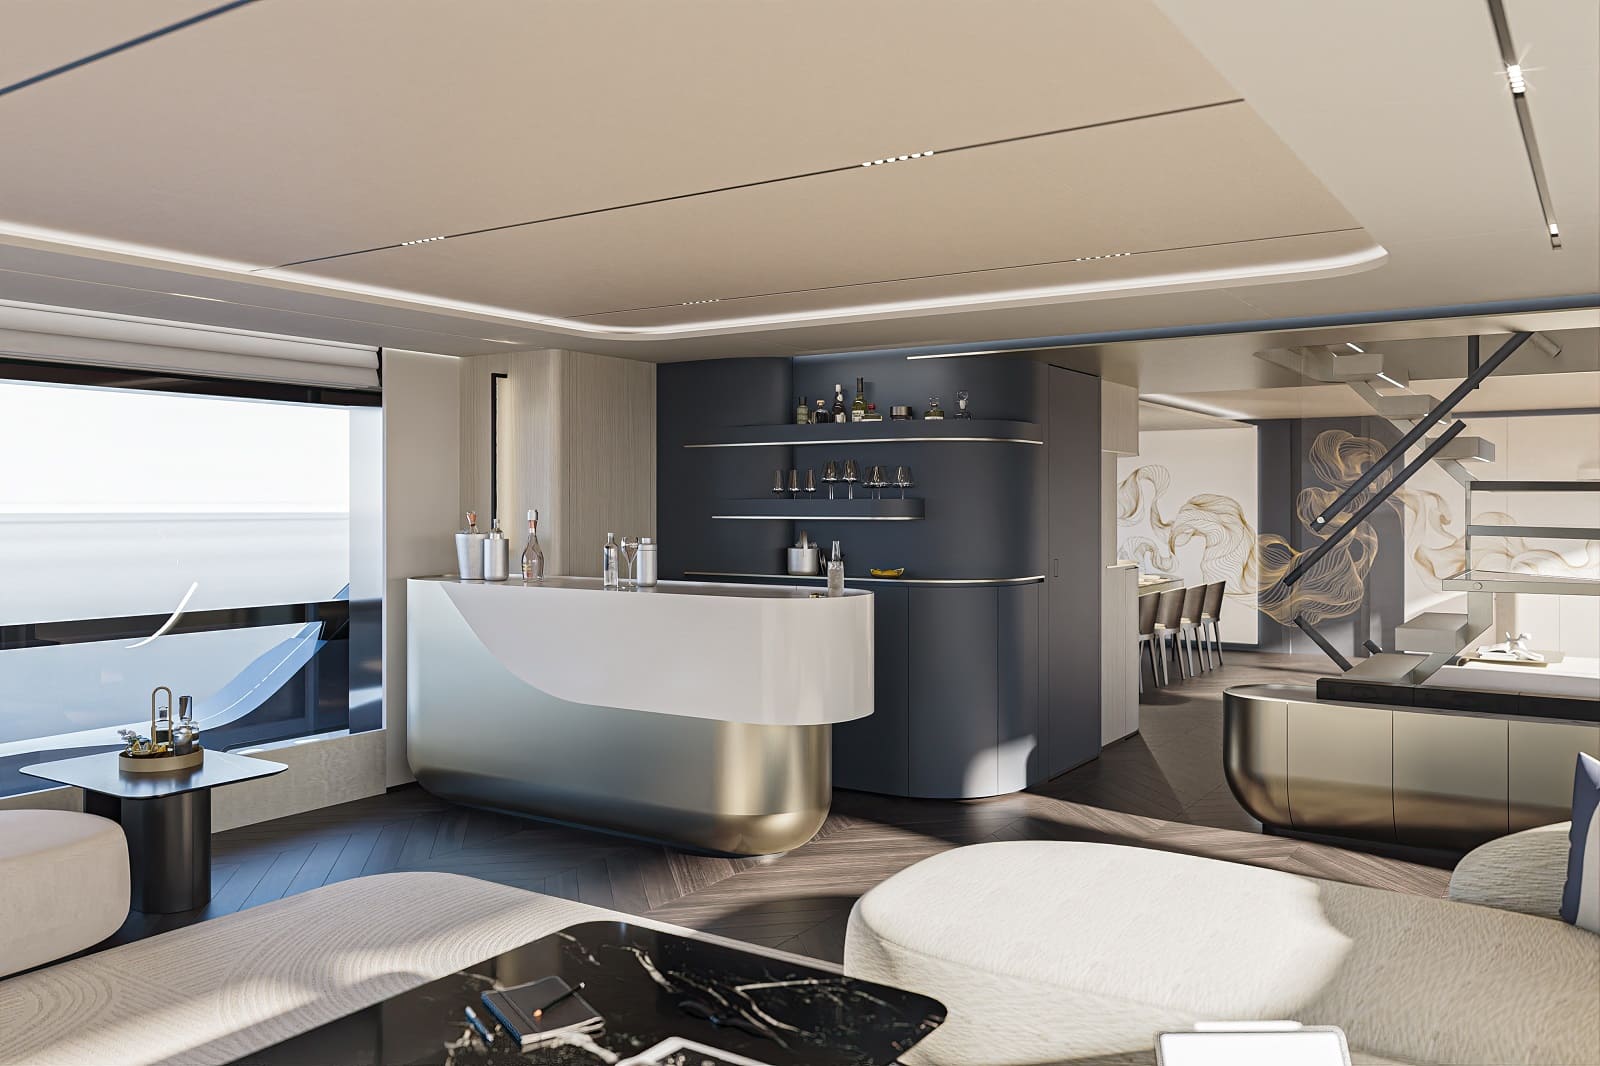 B120 Explorer superyacht: A Stunning Collaboration by Phathom Studio and Bering Yachts